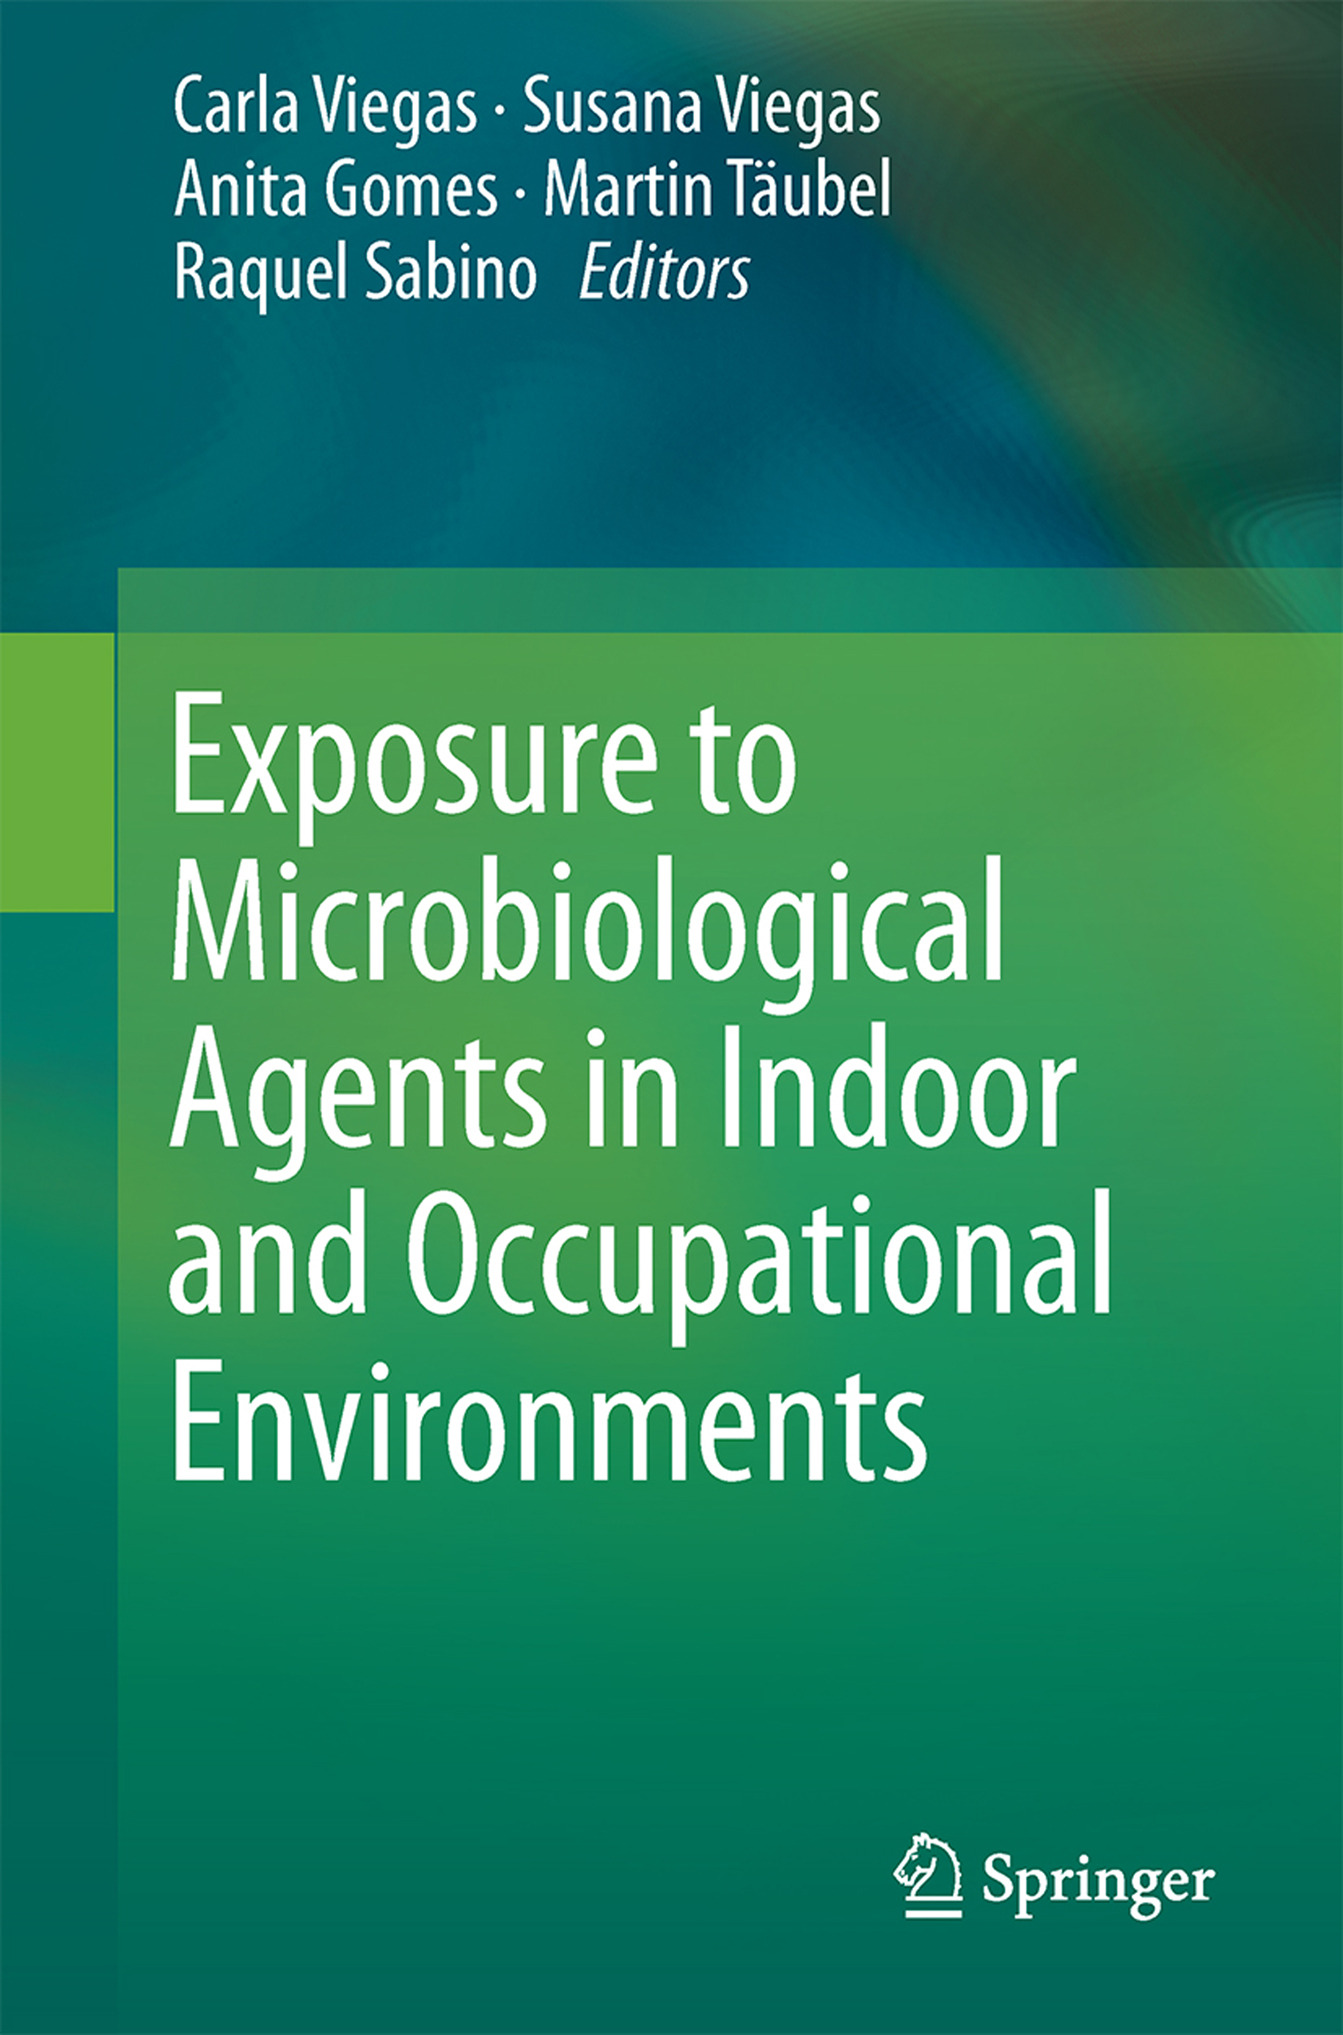 Gomes, Anita - Exposure to Microbiological Agents in Indoor and Occupational Environments, ebook